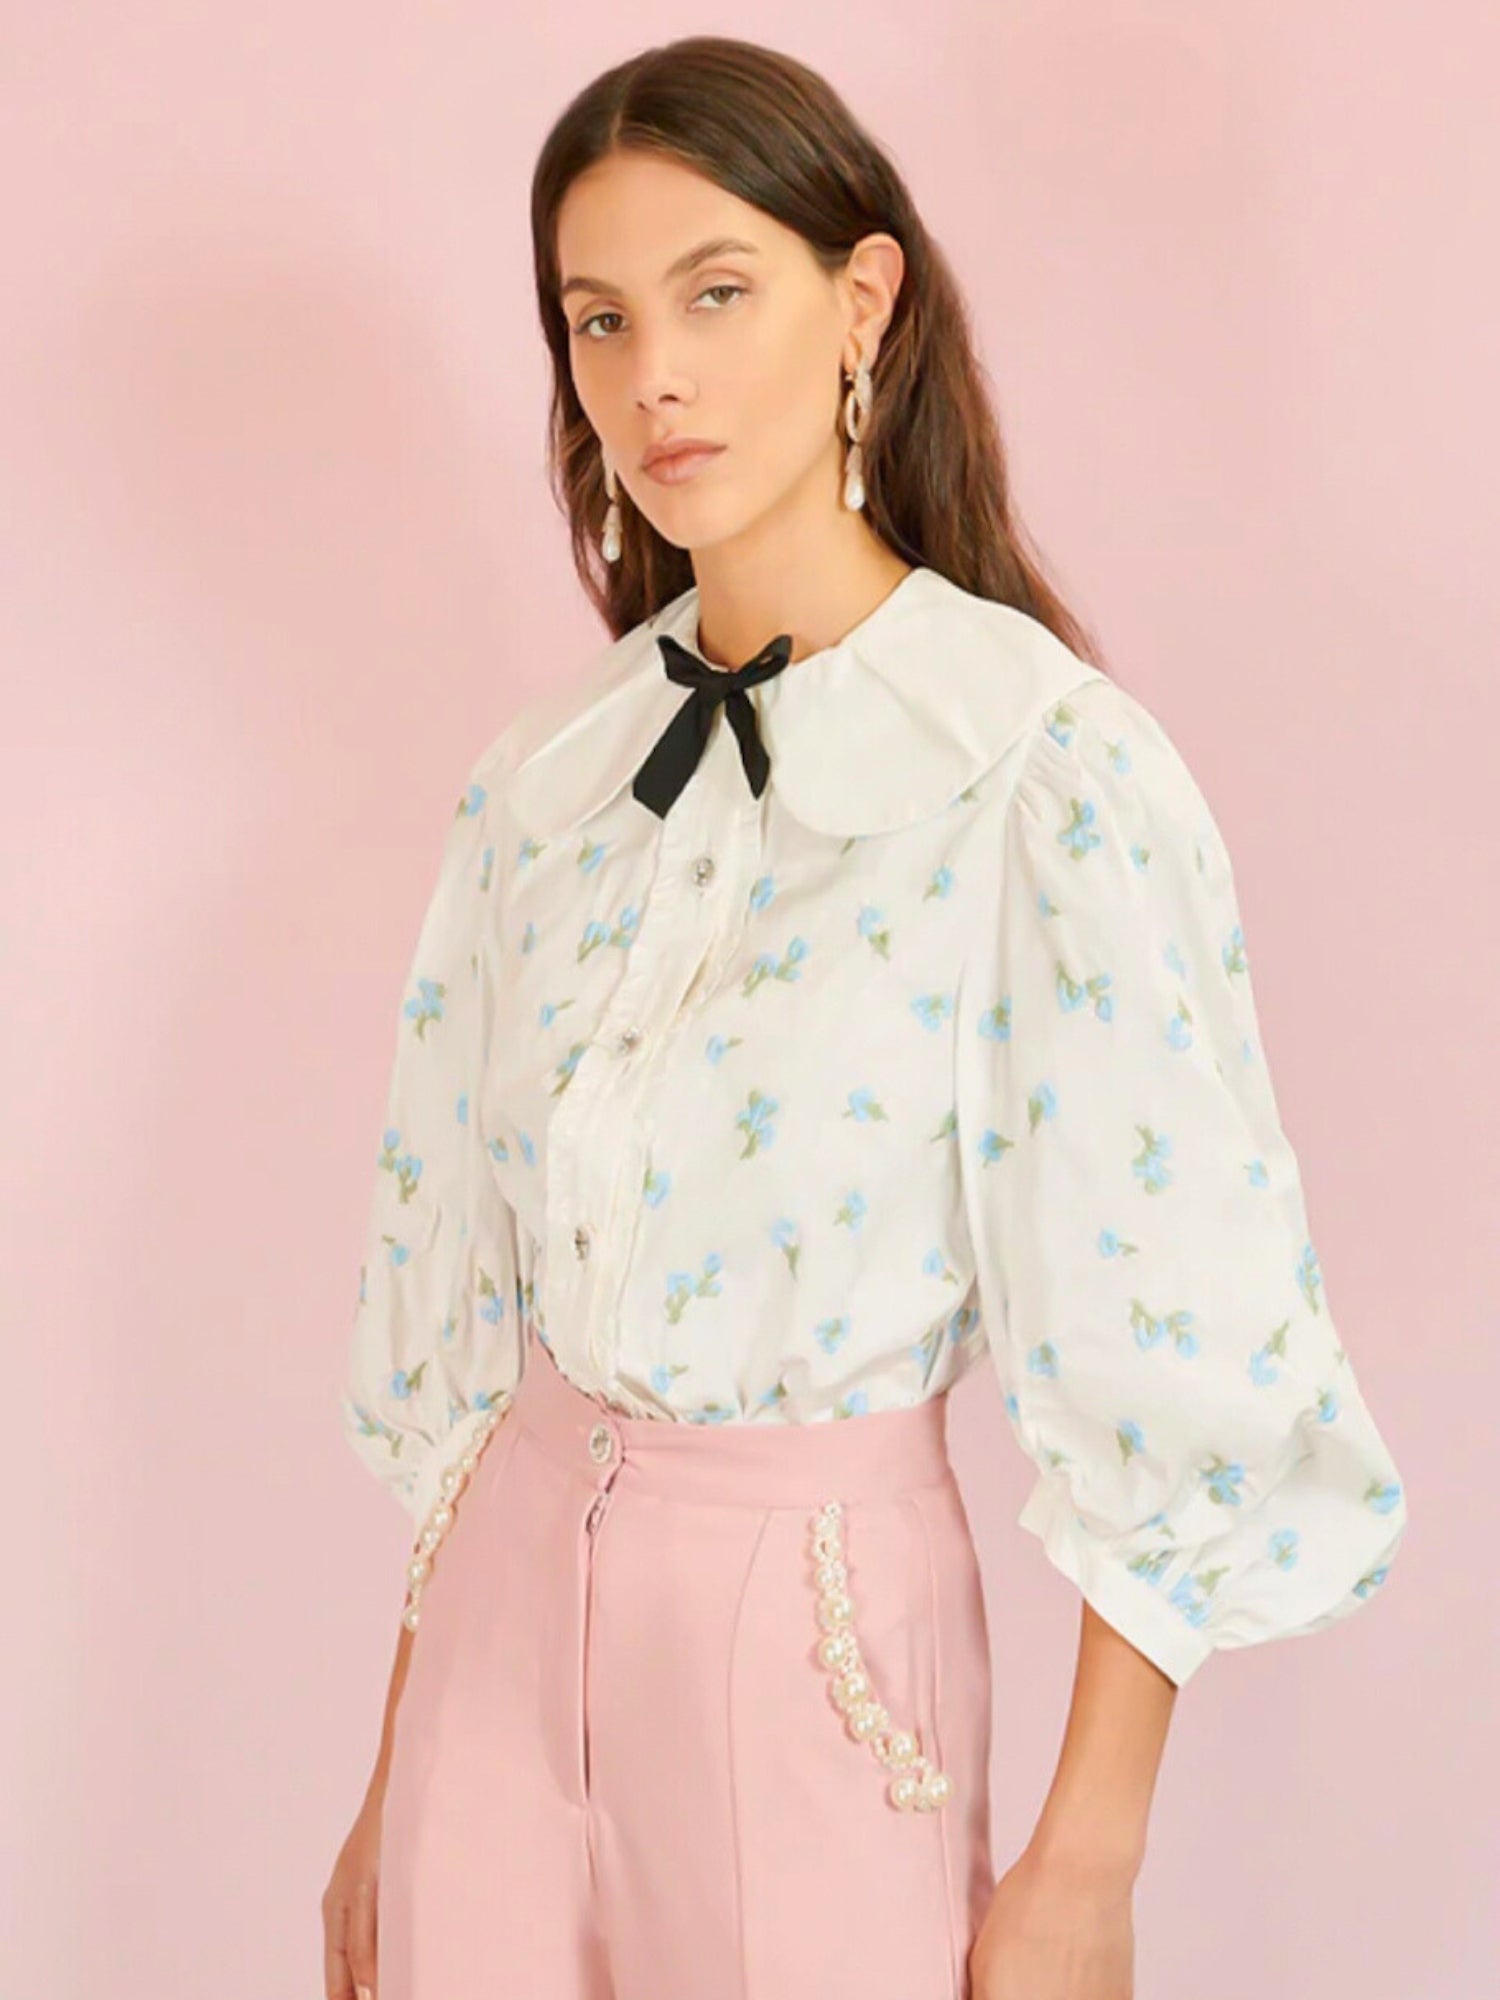 Lapis Shell Blouse - The Lapis Shell Blouse by SisterJane is a bow blouse in a floral embroidered cotton fabric. Featuring a pleated round collar and ruffle placket with stand out gem buttons. Detailed with oversized mid length sleeves. - Ivory Sheep Coll